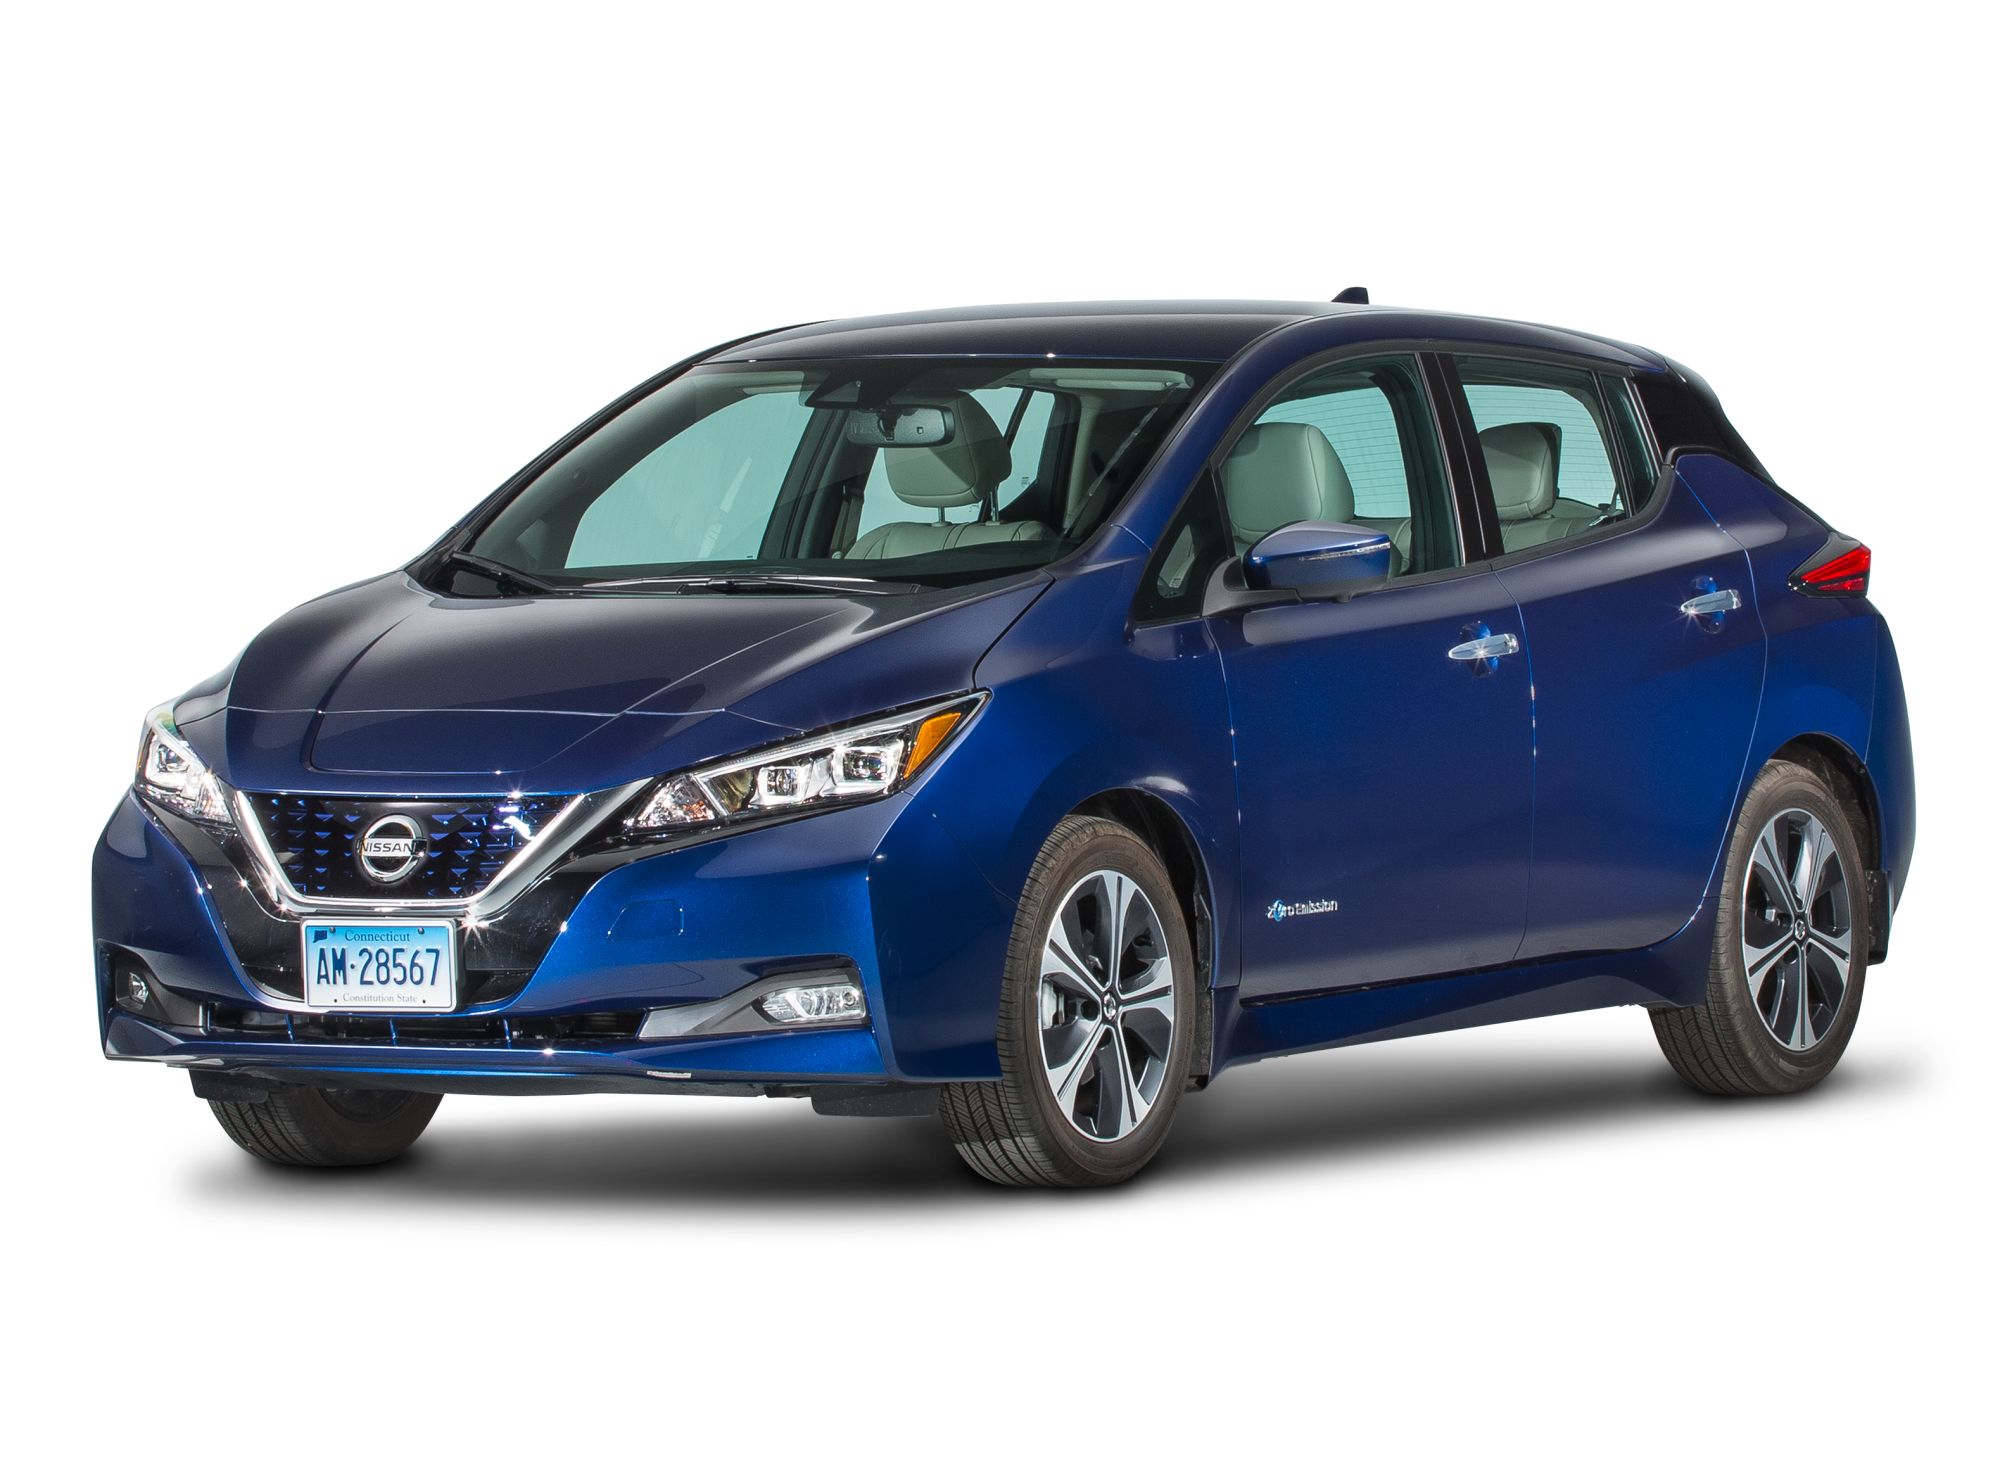 https://crdms.images.consumerreports.org/c_lfill,w_2000/prod/cars/cr/model-years/8474-2018-nissan-leaf.jpg